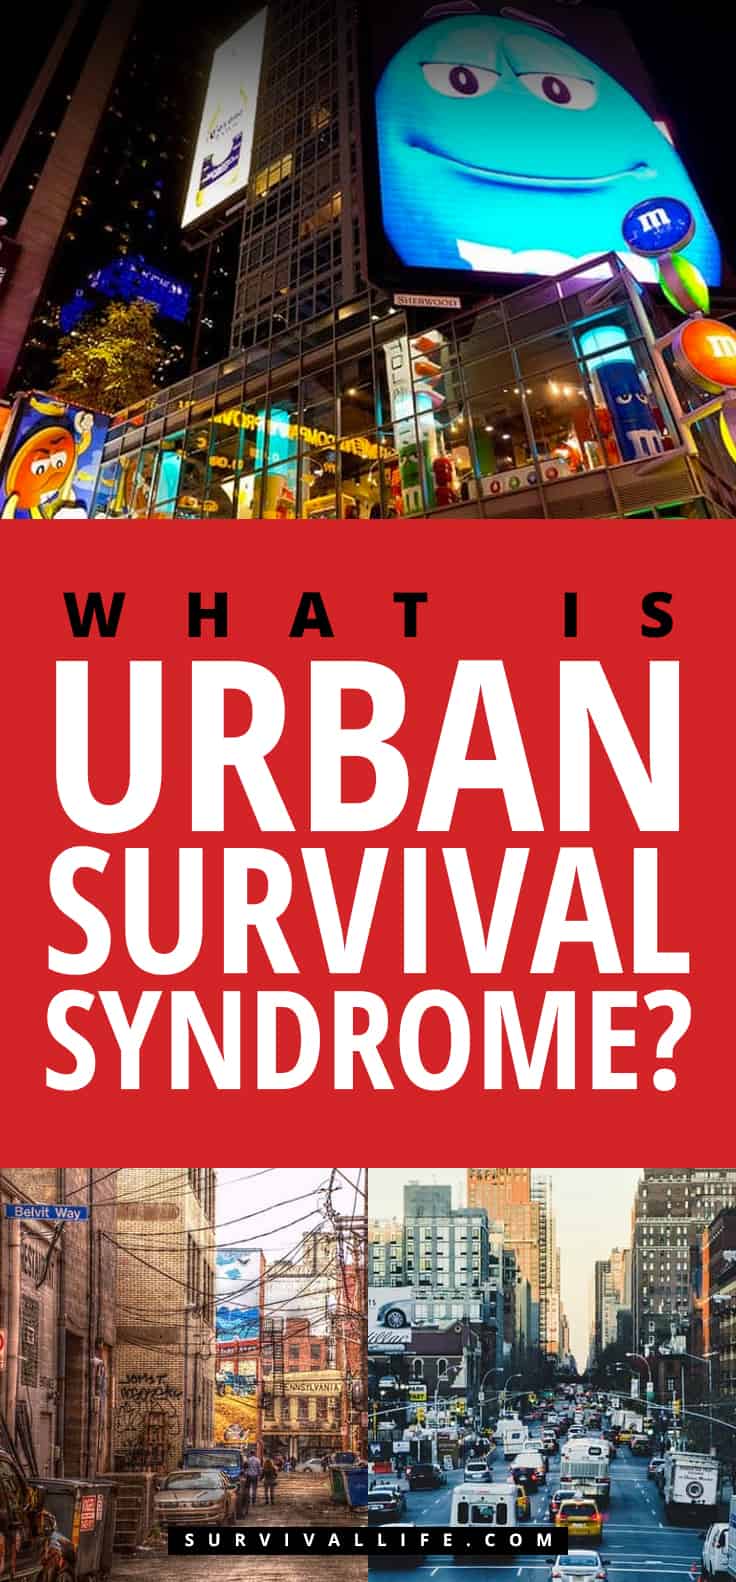 Placard | What Is Urban Survival Syndrome?